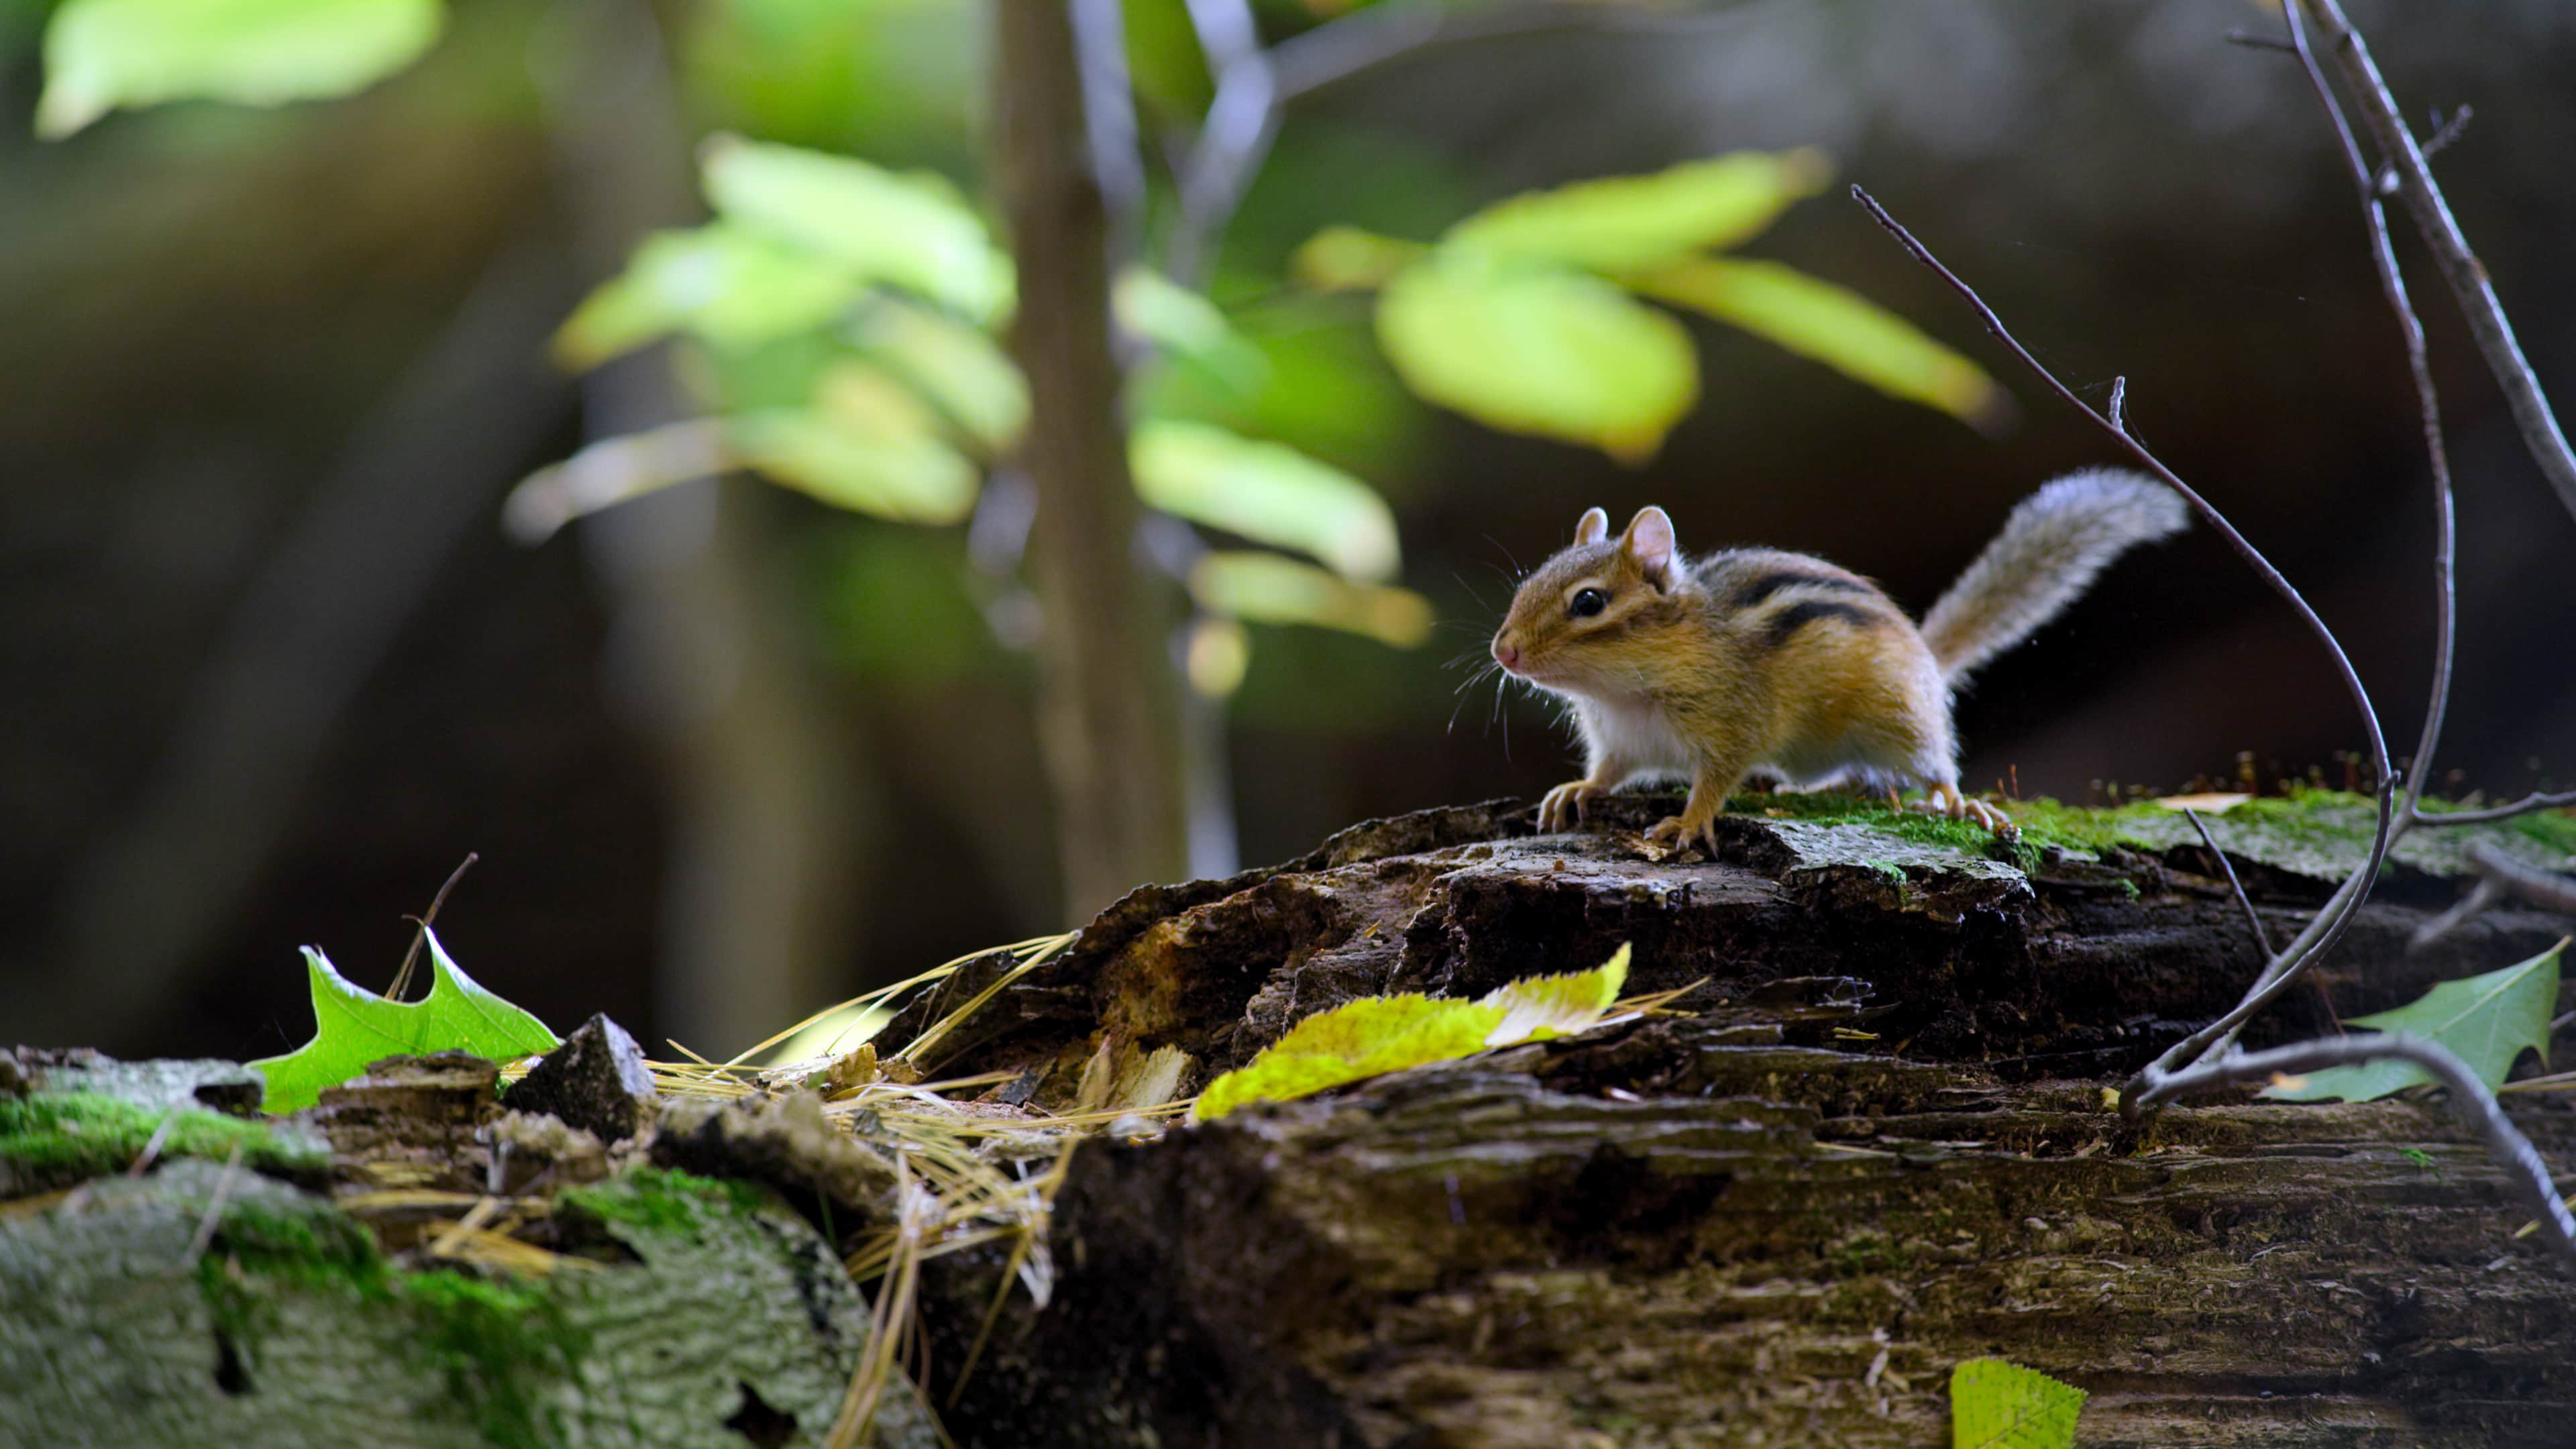 It's all cute all the time in 'Tiny World,' the new Apple TV+ nature docuseries